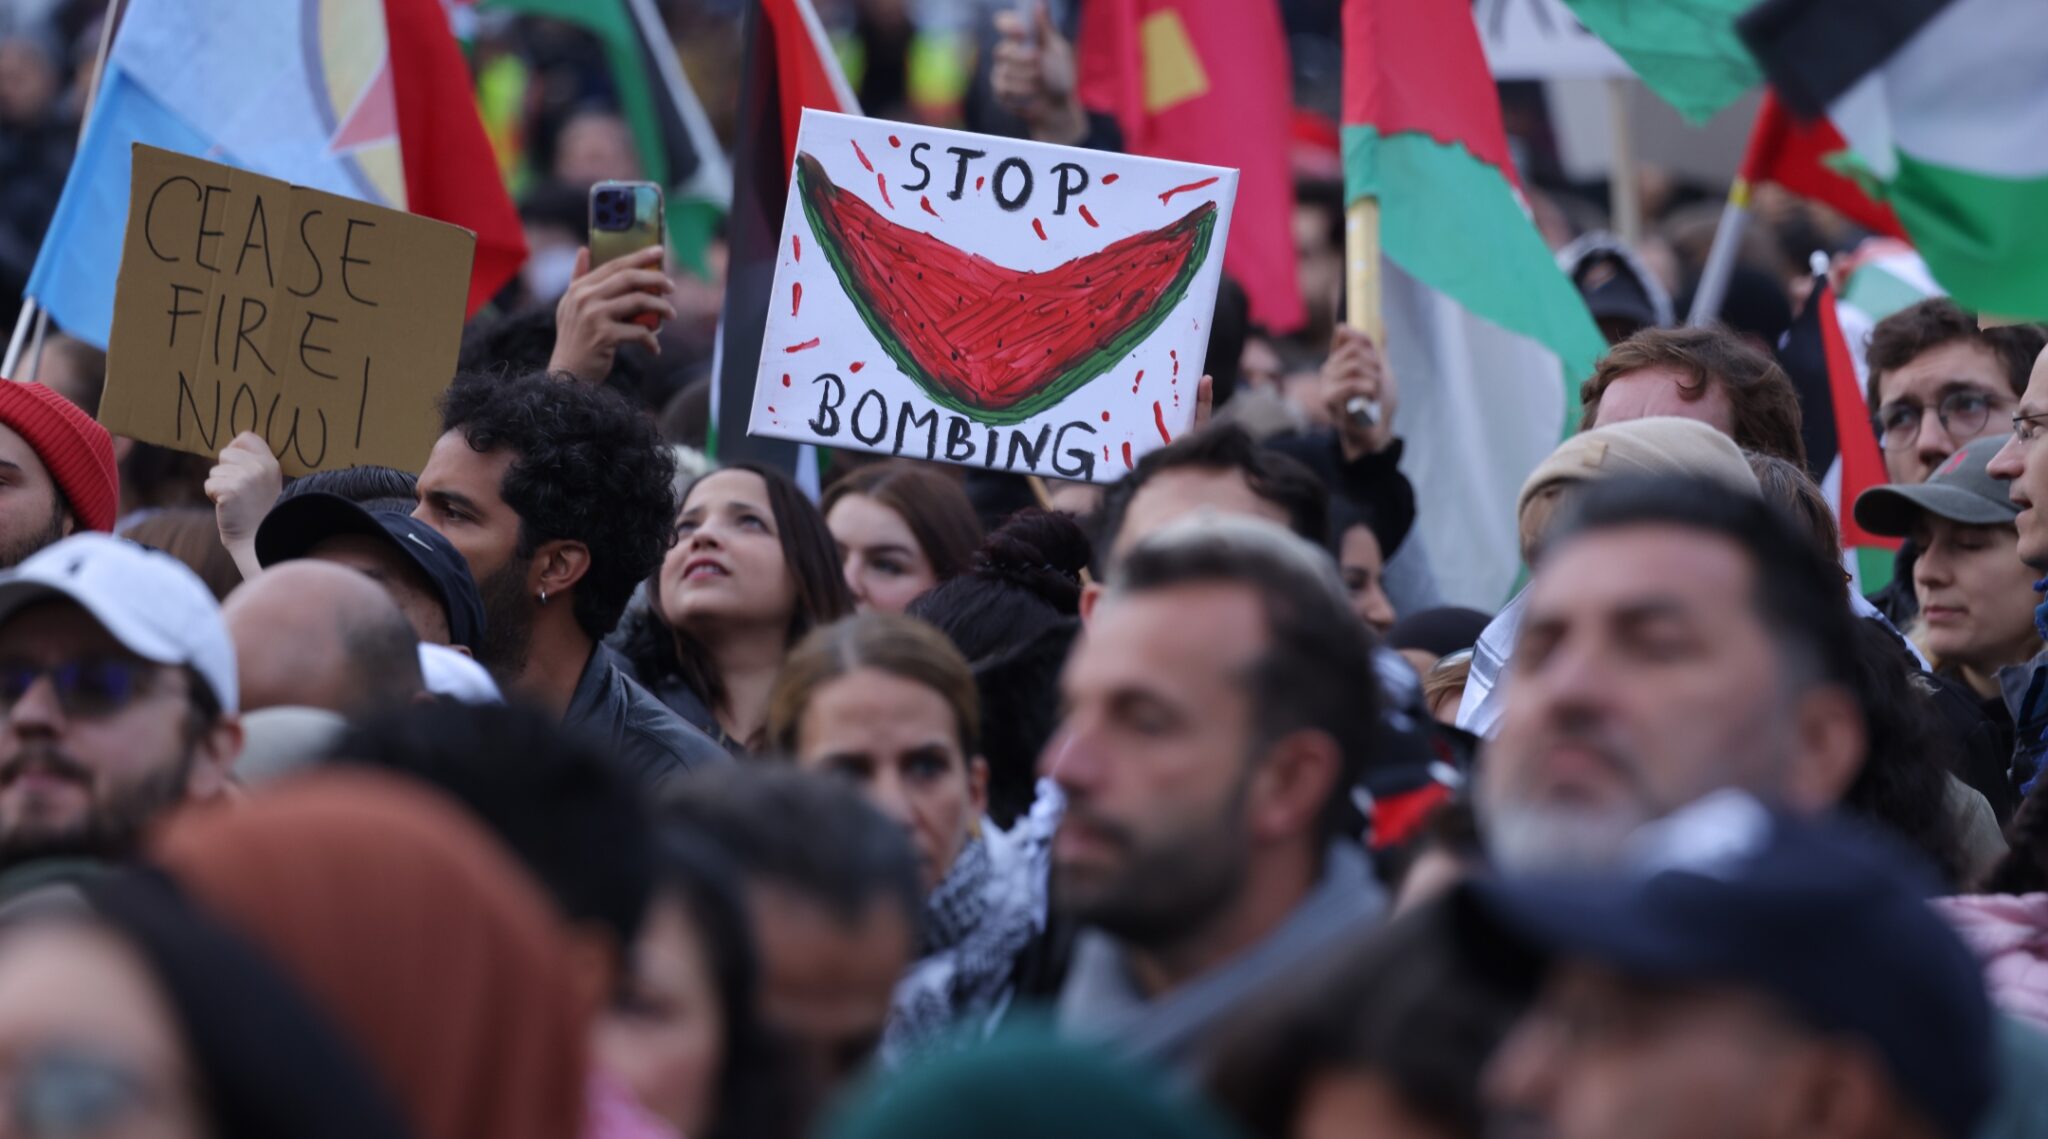 Someone in crowd holds up Stop Bombing sign with image of watermelon